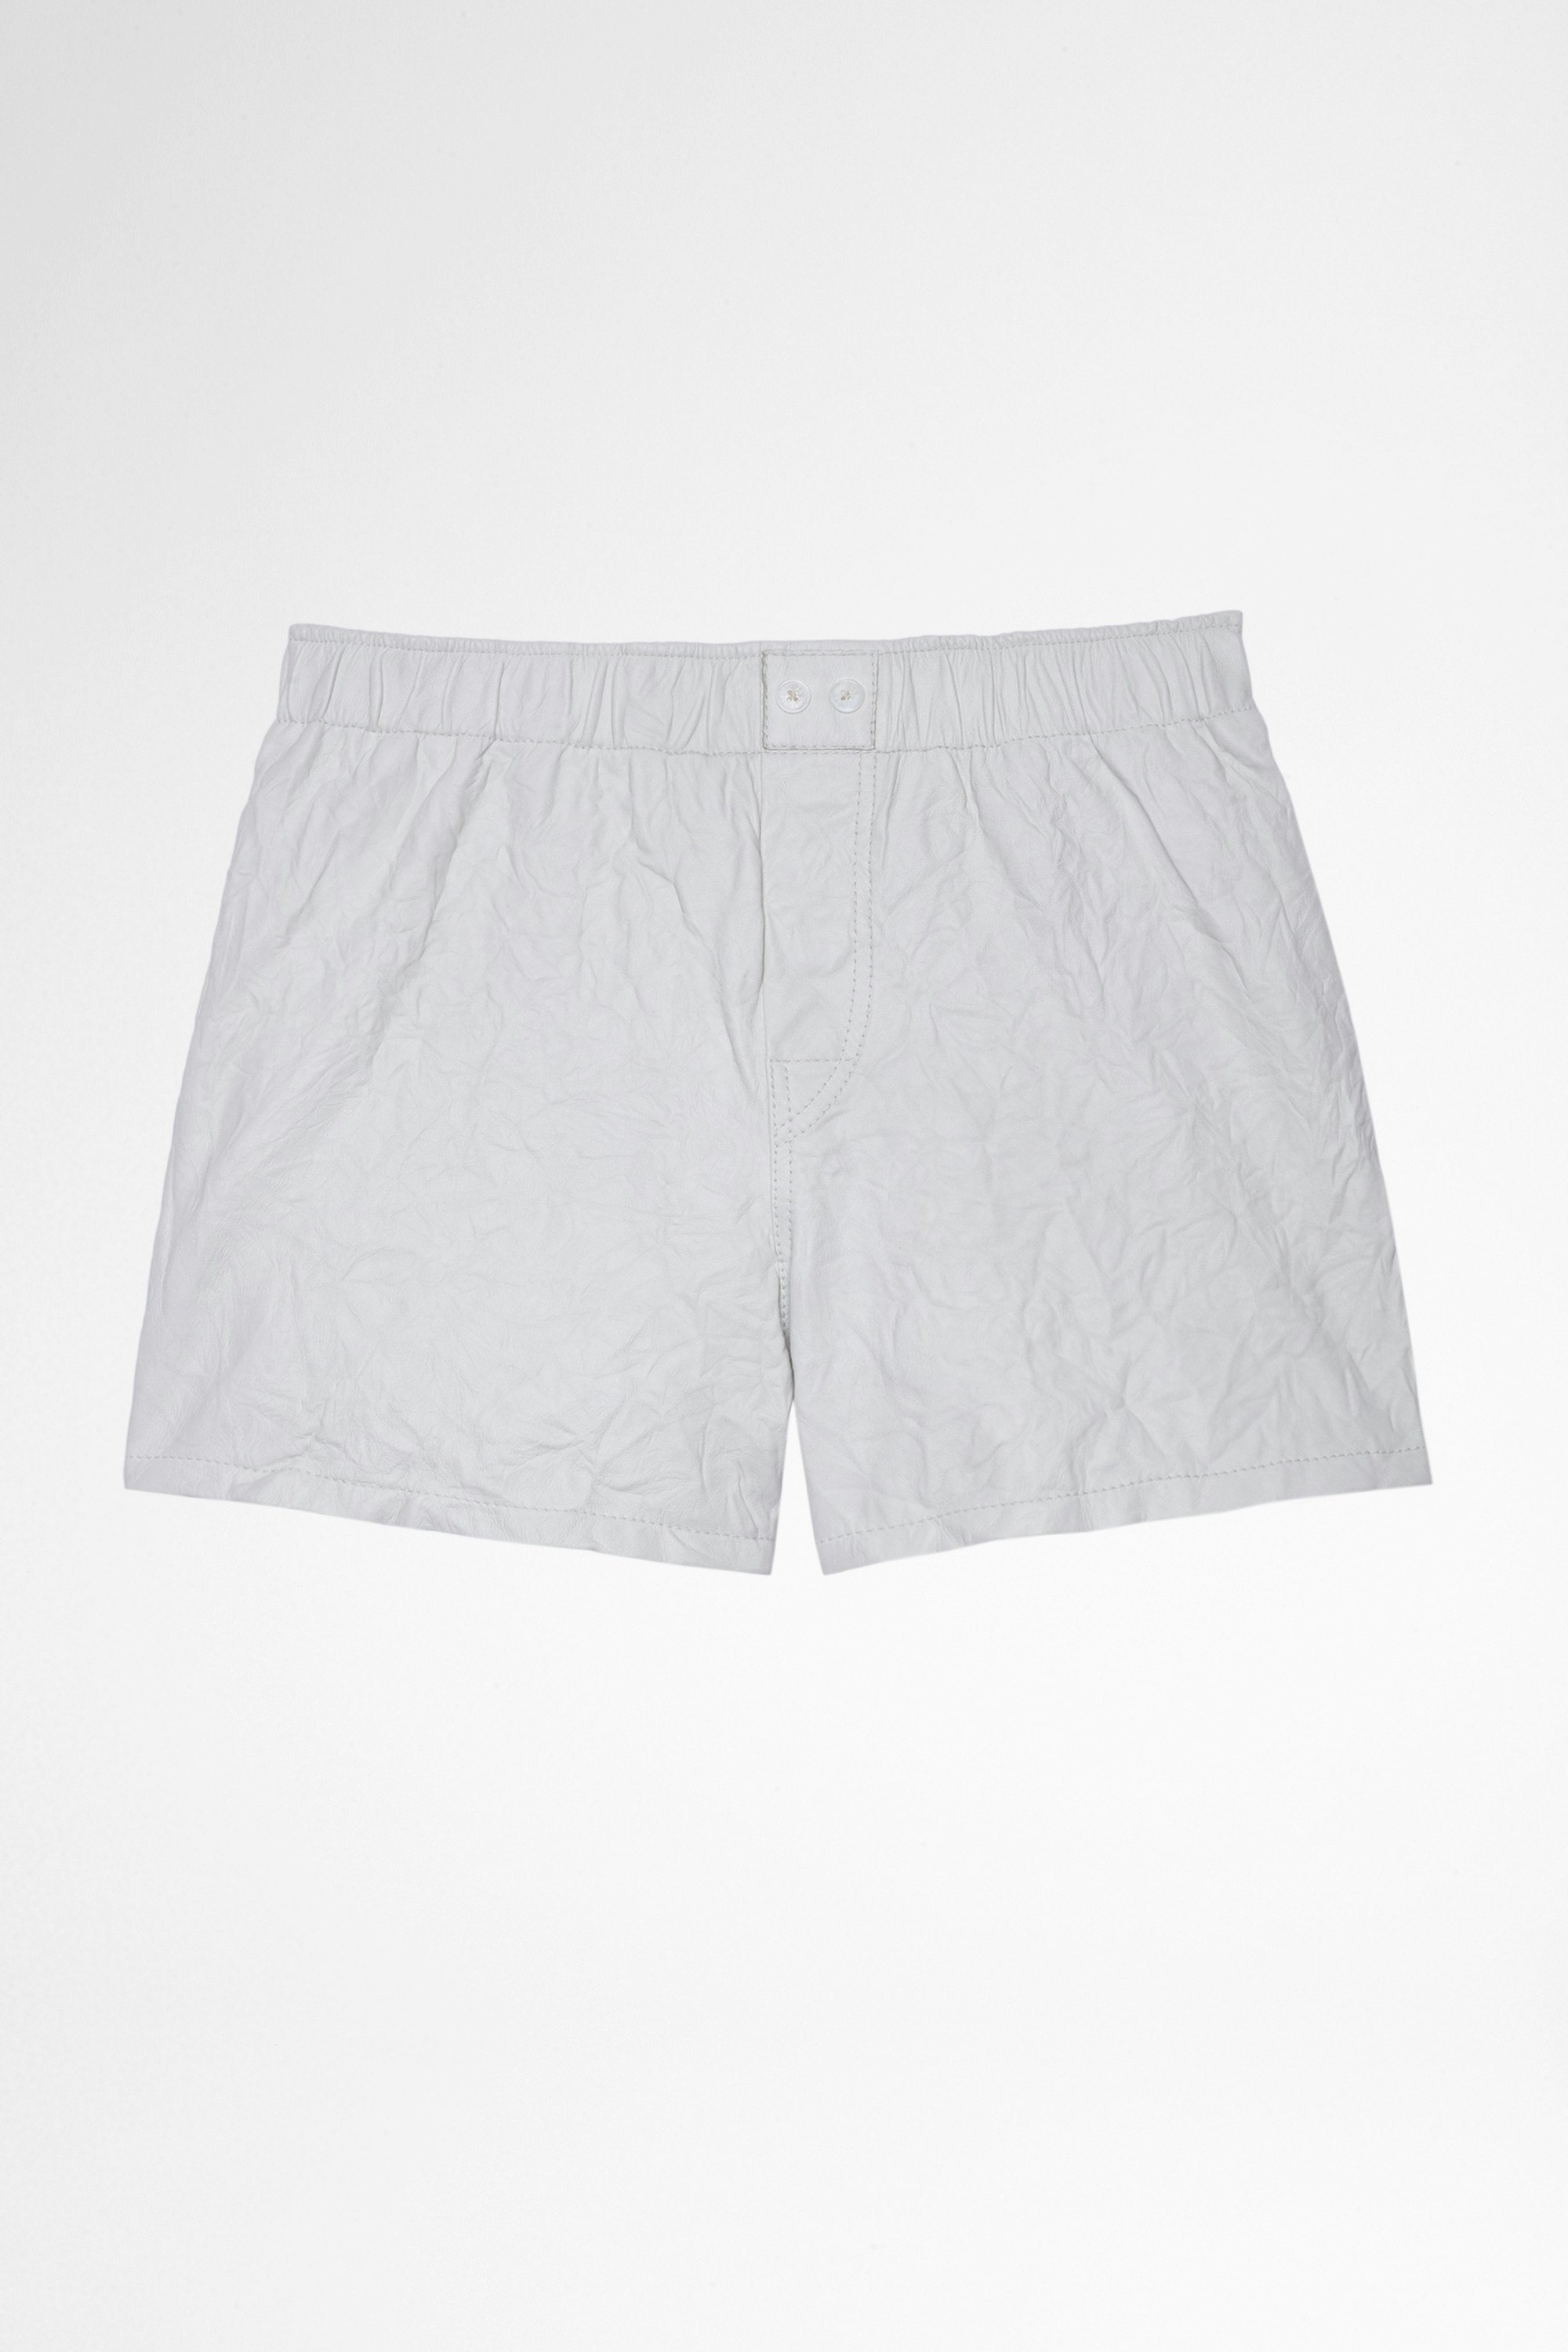 Pax ショーツ  Crinkled レザー Women's crumpled leather shorts in white